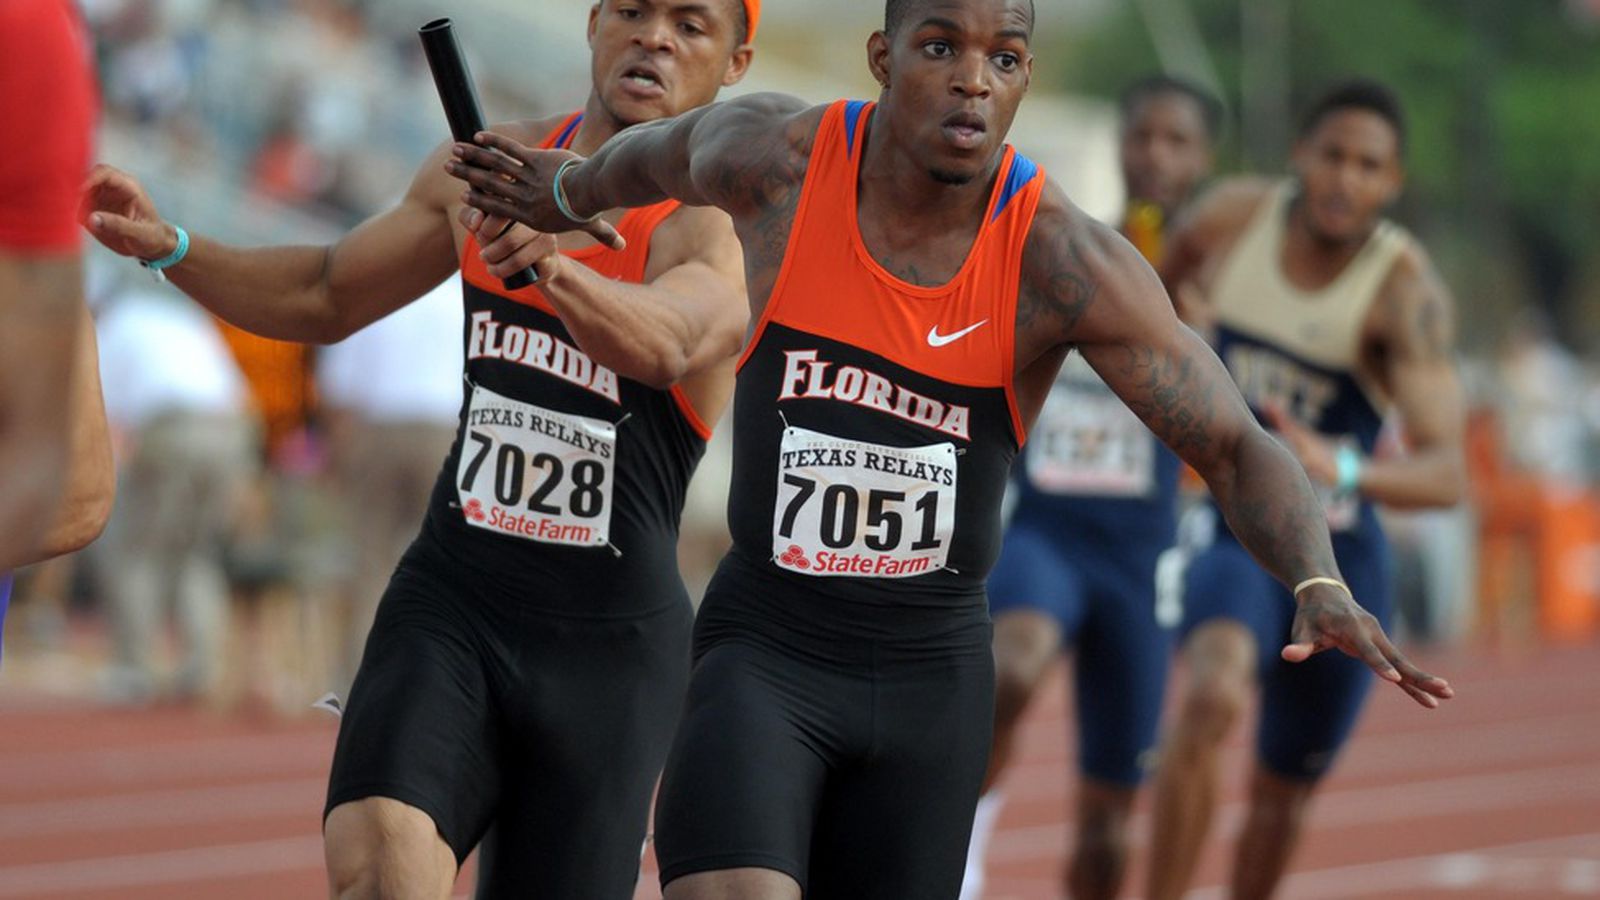 Florida Gators track and field in action today as hosts of the Gator